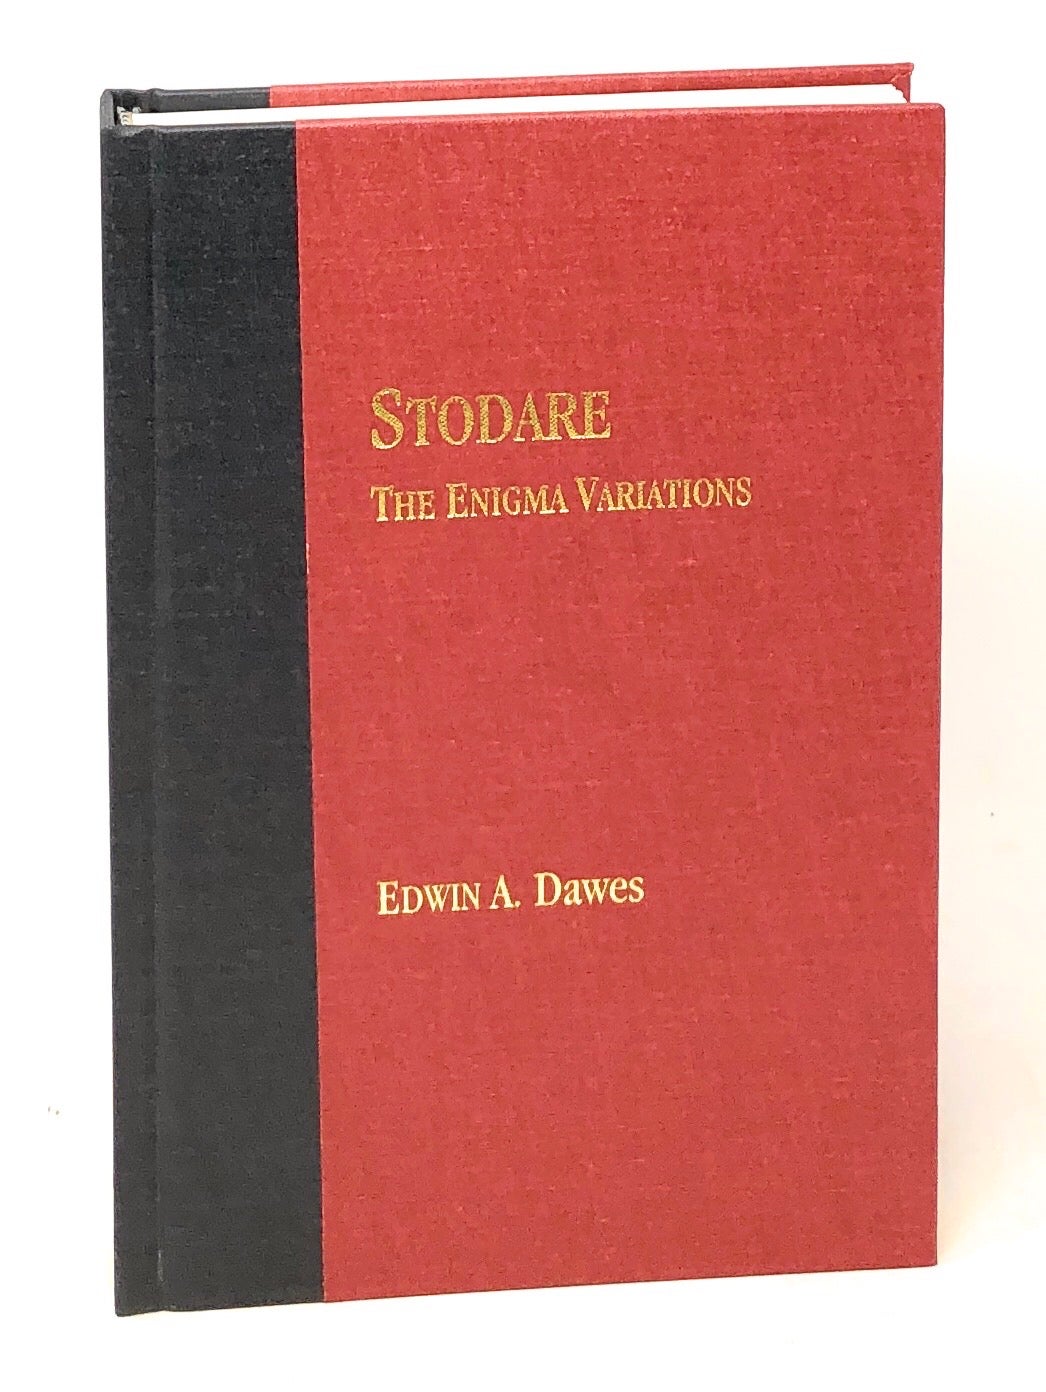 First　Stodare:　A.　Edition　The　Dawes　Enigma　Variations　Edwin　Limited